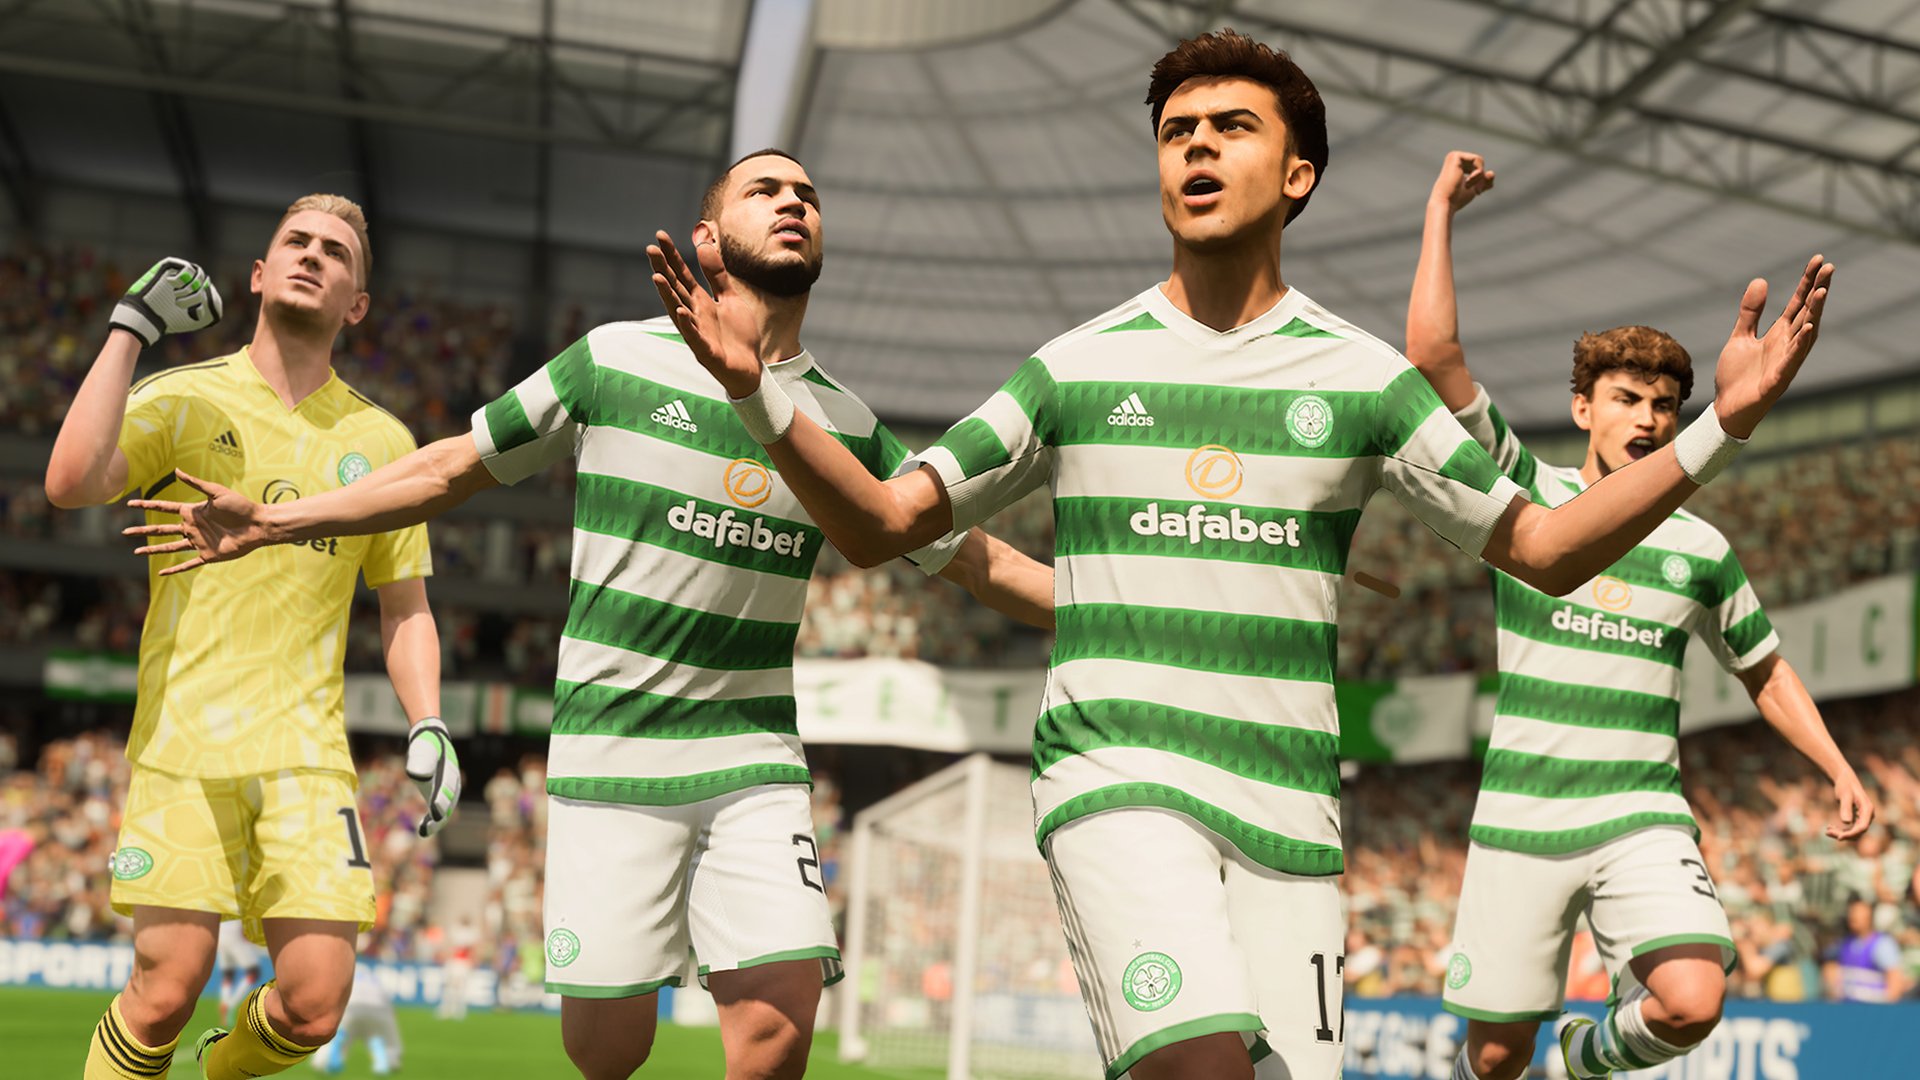 FIFA 23 Trial Available Today For EA Play Subscribers - Operation Sports